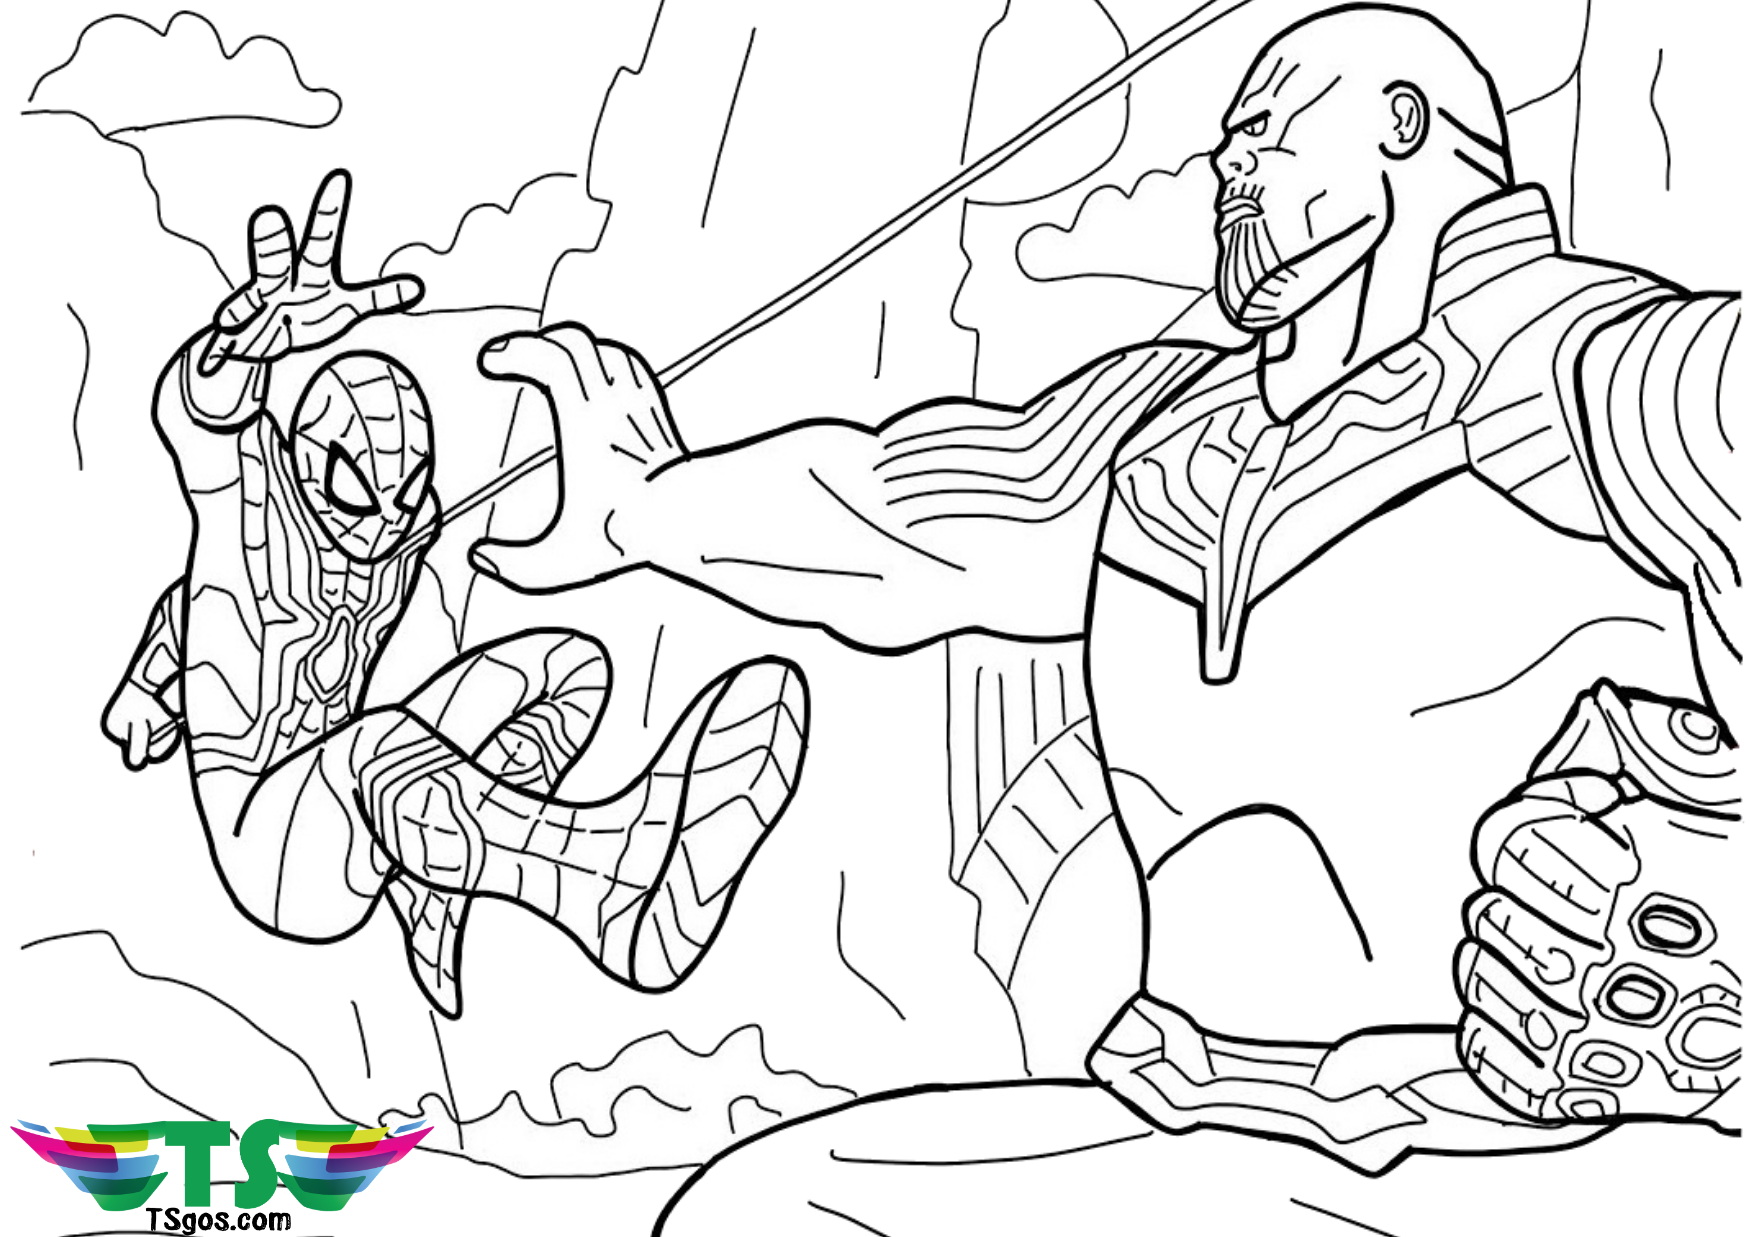 Free download to print Spiderman vs Thanos coloring pages   TSgos ...